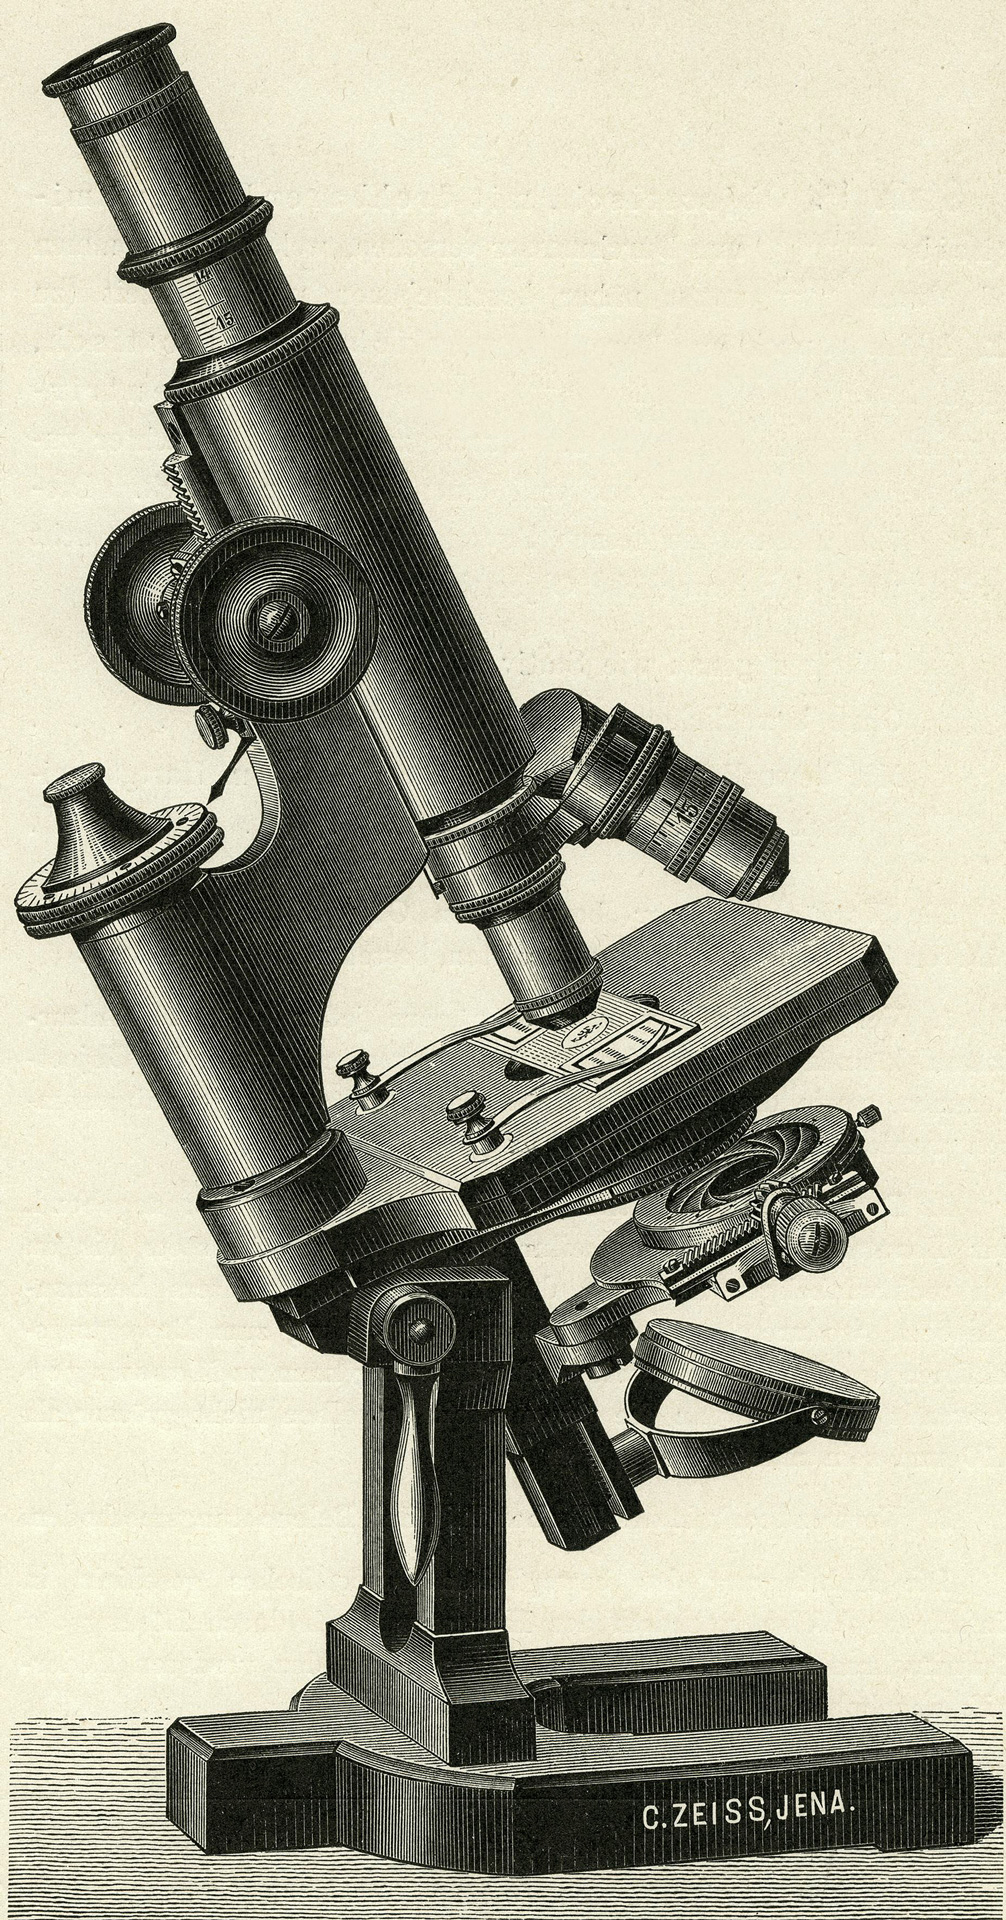 Who Invented the Microscope?